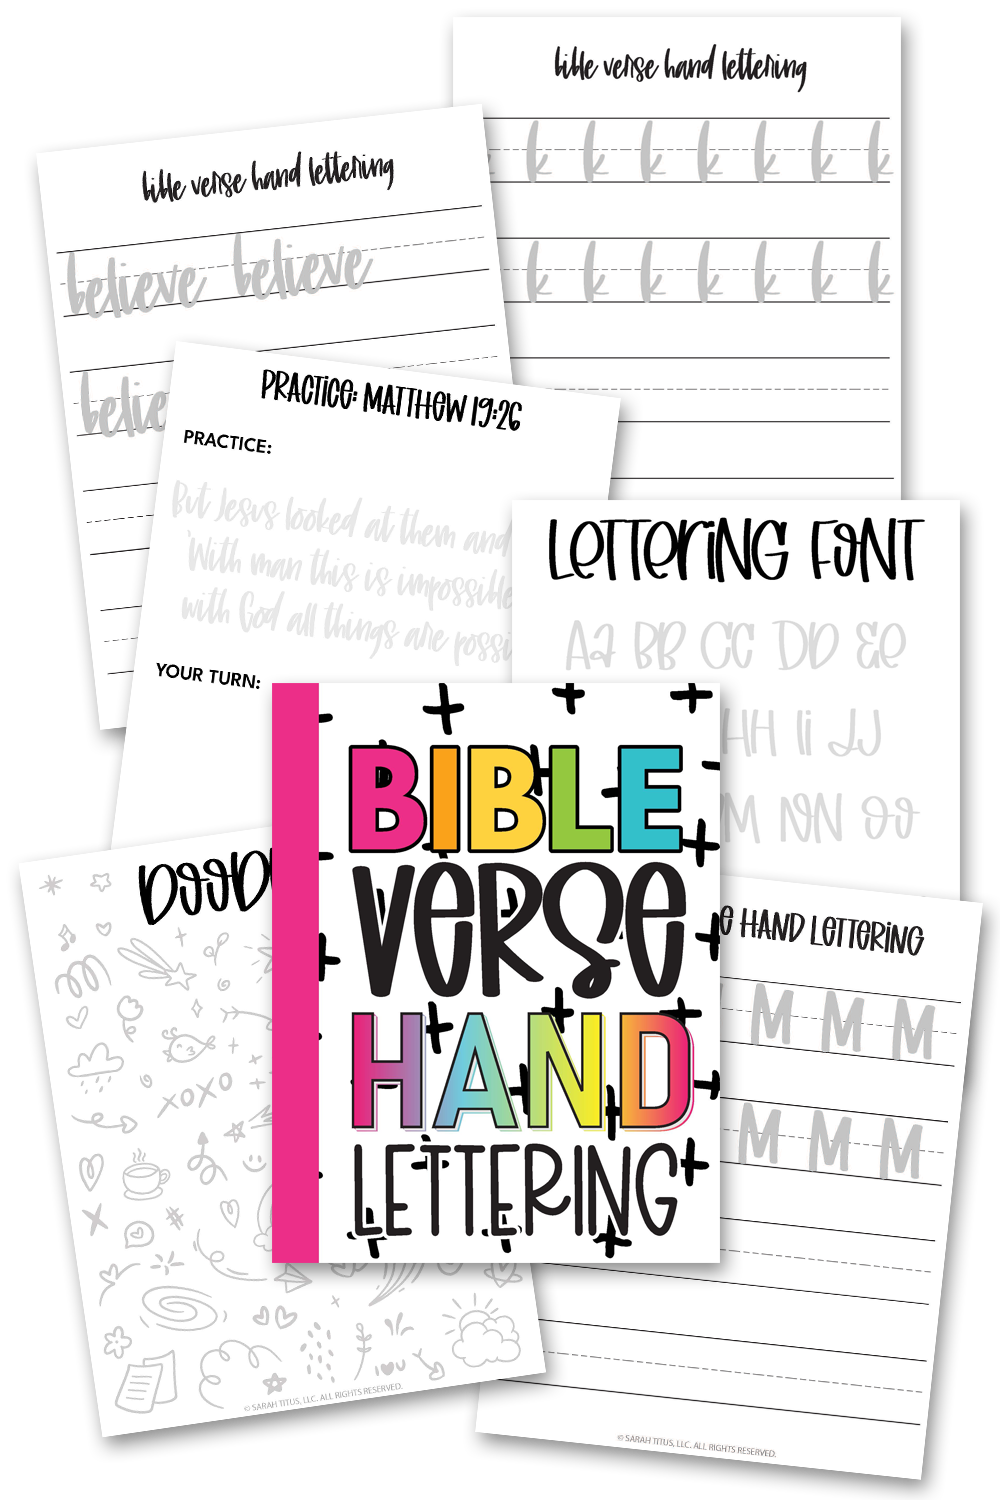 Creative Lettering Workbook combining Doodles, Letters and Mixing